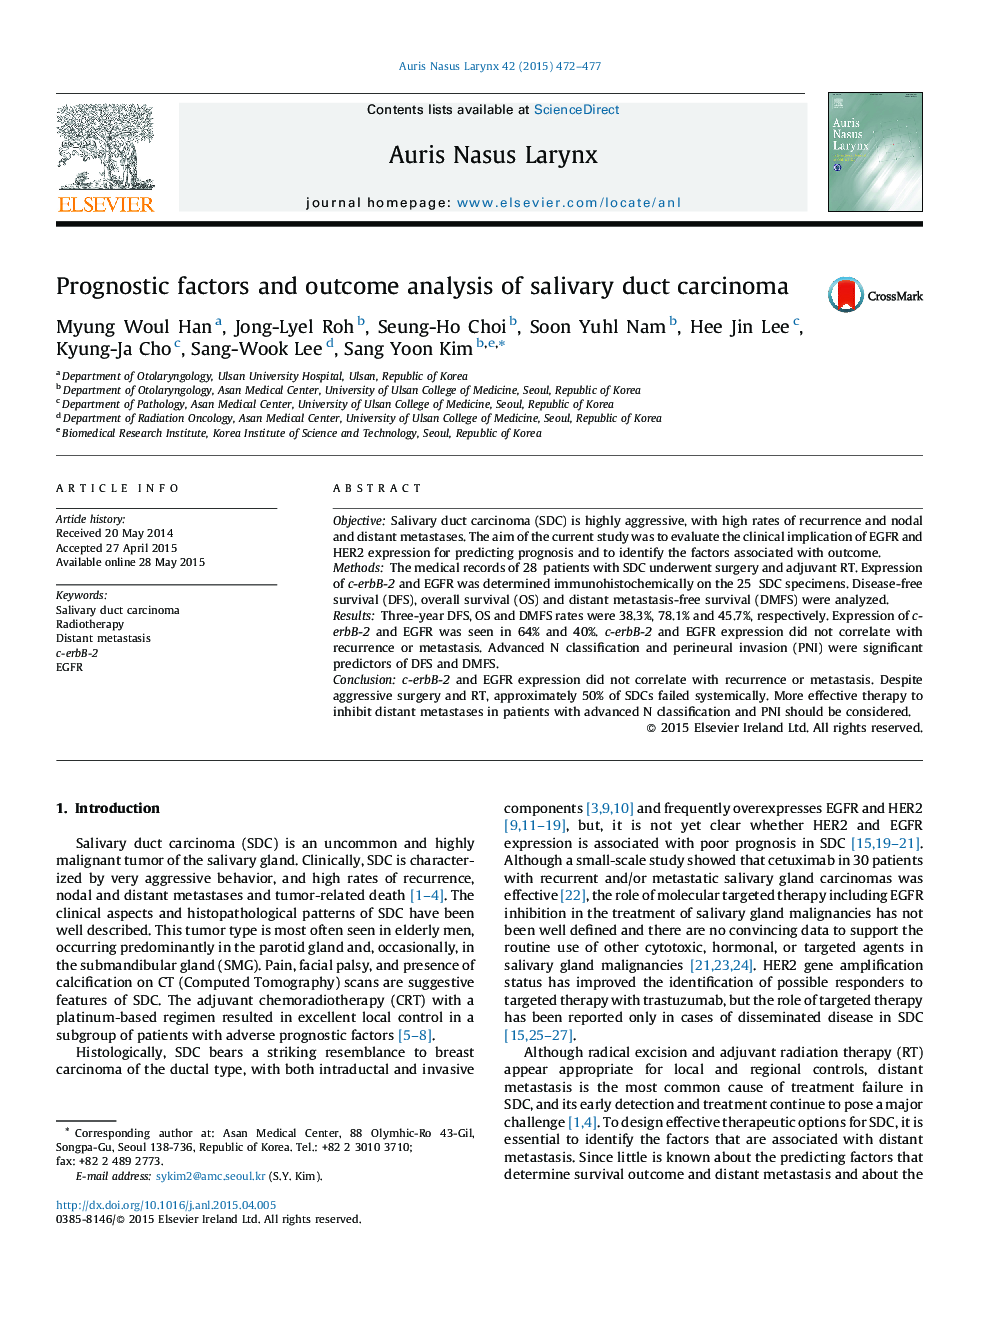 Prognostic factors and outcome analysis of salivary duct carcinoma